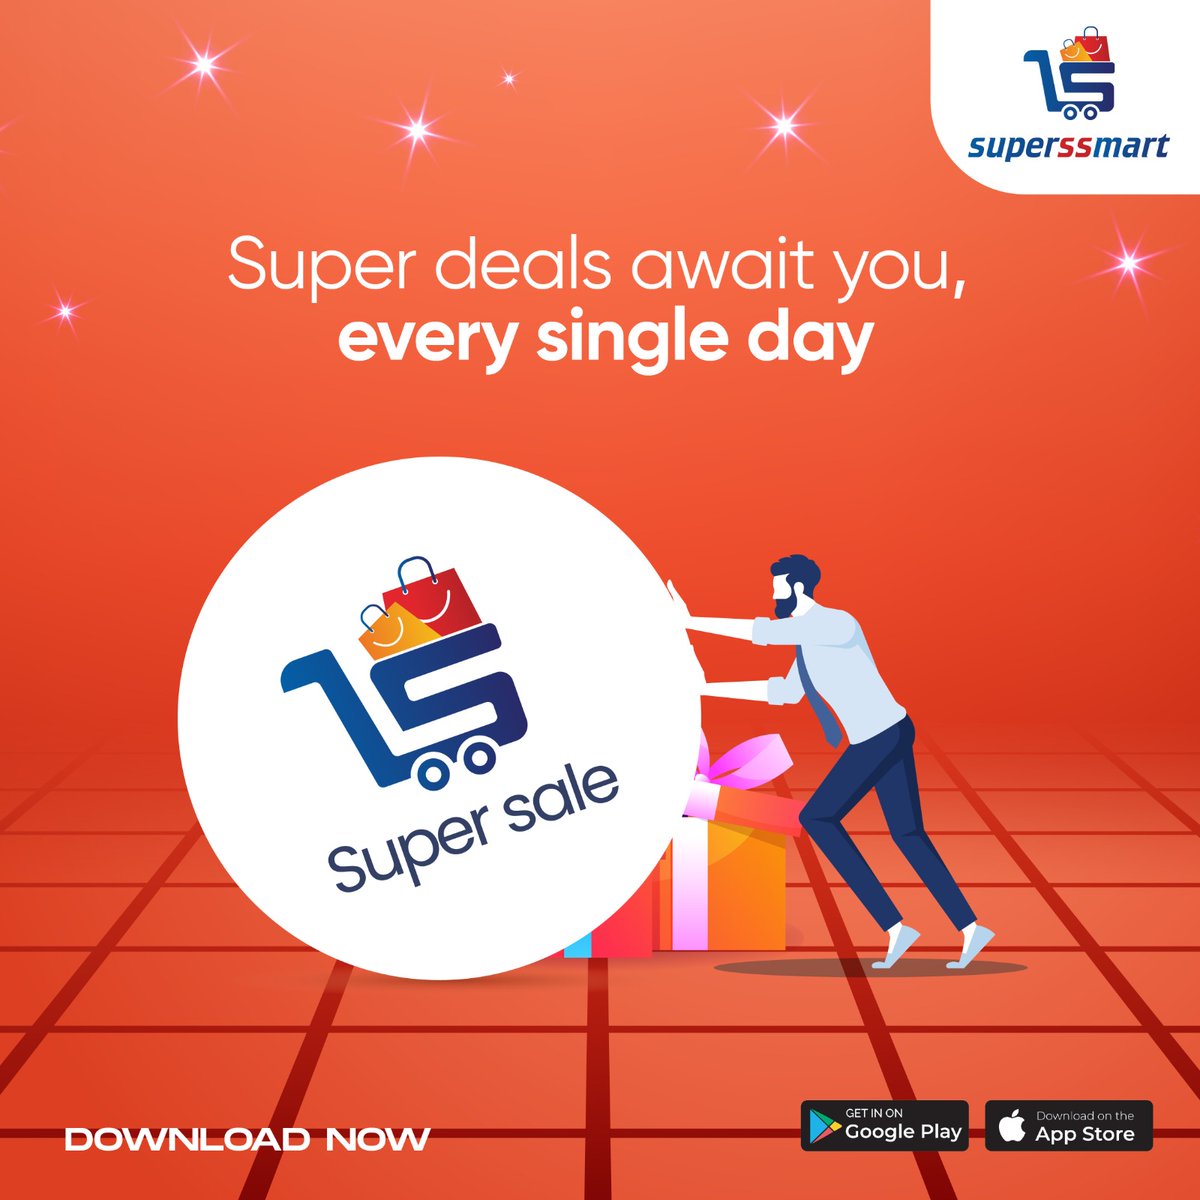 You can't keep a good deal waiting, but our super deals will be sure to wait for you! ✅ Don't take too long though, hurry up and shop while offers last 😉🛒

#deals #discounts #offers #diwalioffer #onlineshopping #onlineshoppingindia #onlineshopindia #shoplocal #shoponline